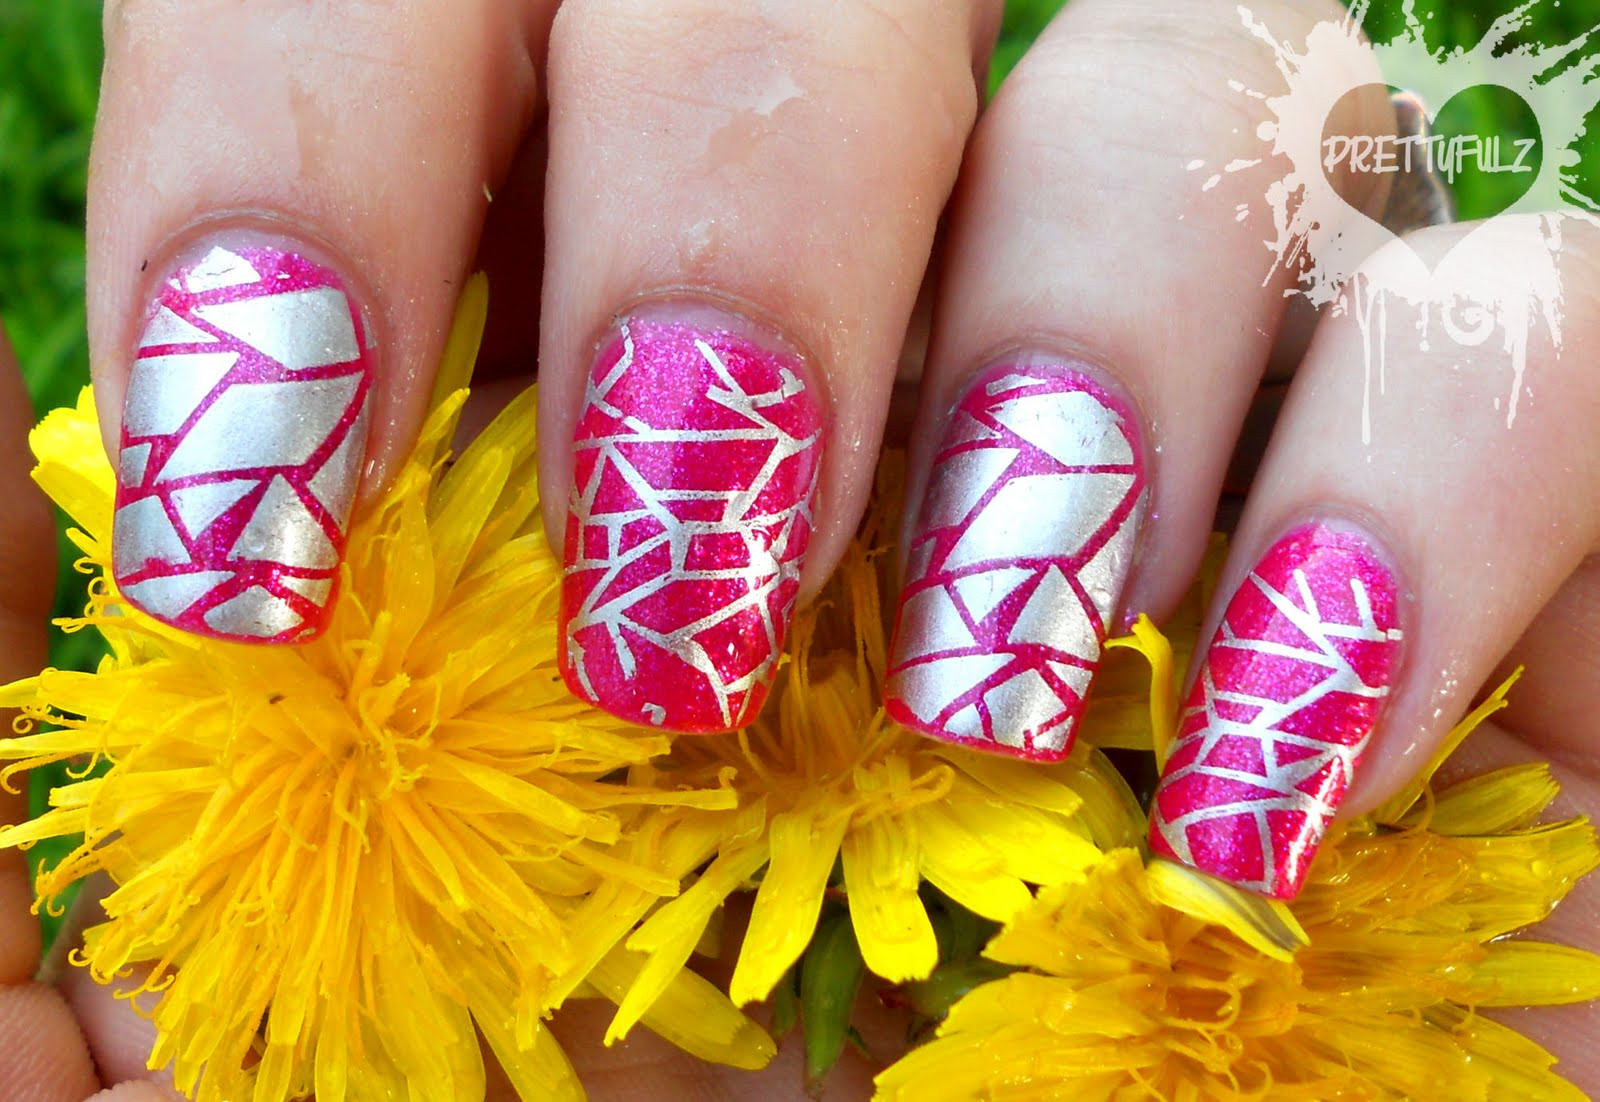 Pink And Silver Nail Designs
 Prettyfulz Pink Wednesdays